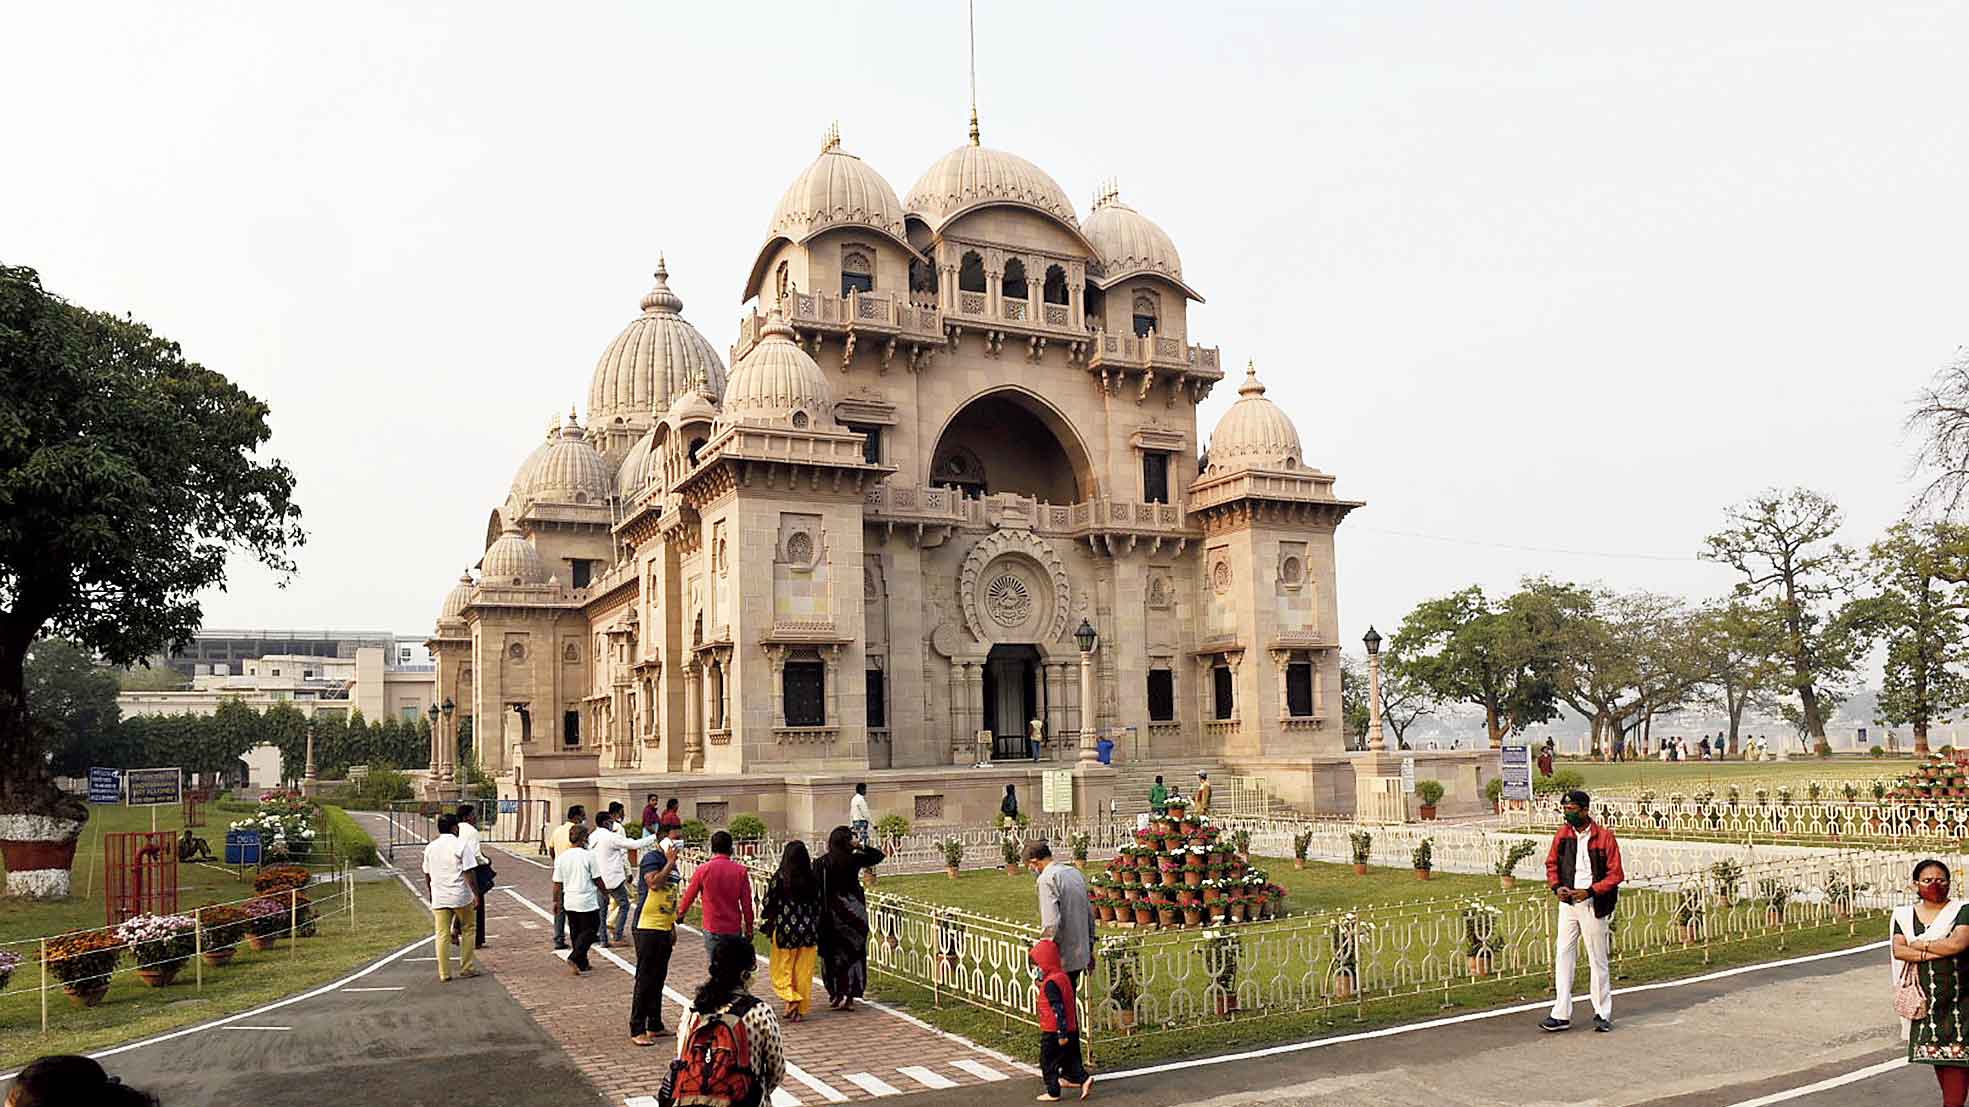 Visitors at Belur Math on Wednesday. The Math had remained closed for visitors for nearly six months because of the Covid pandemic and reopened its doors on Wednesday.